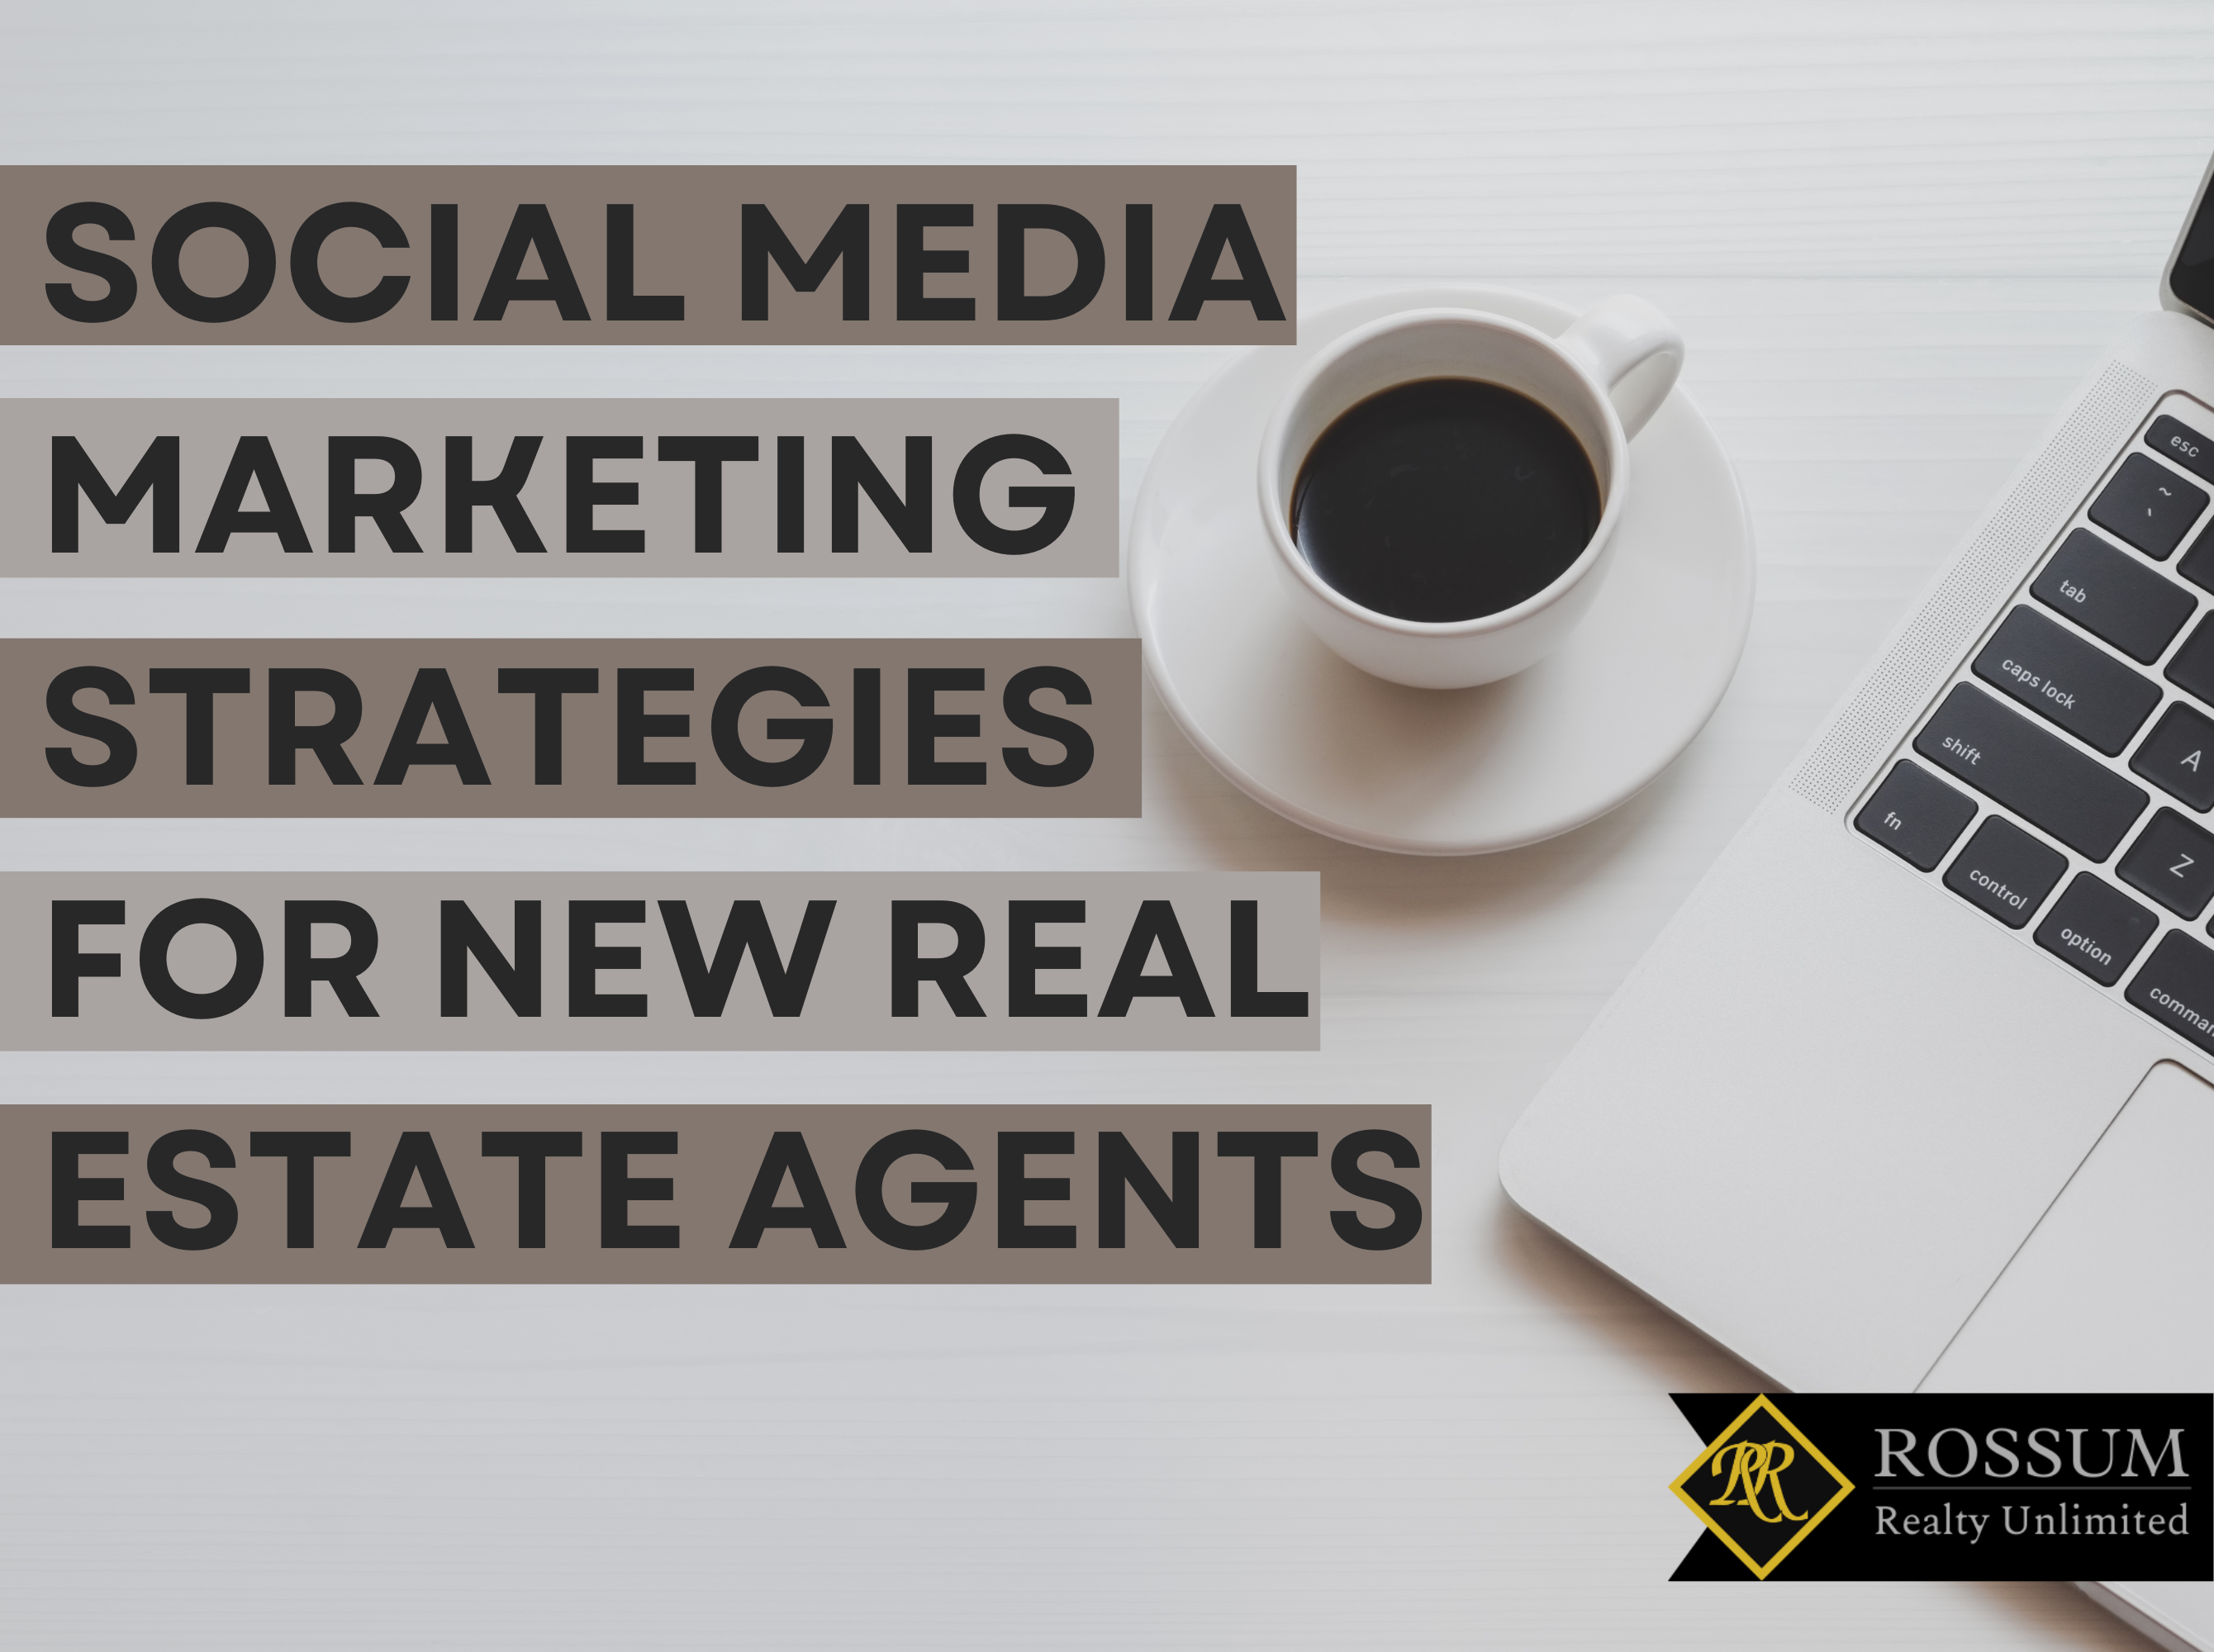 Rossum Presents: Social media marketing strategies for new real estate agents class.